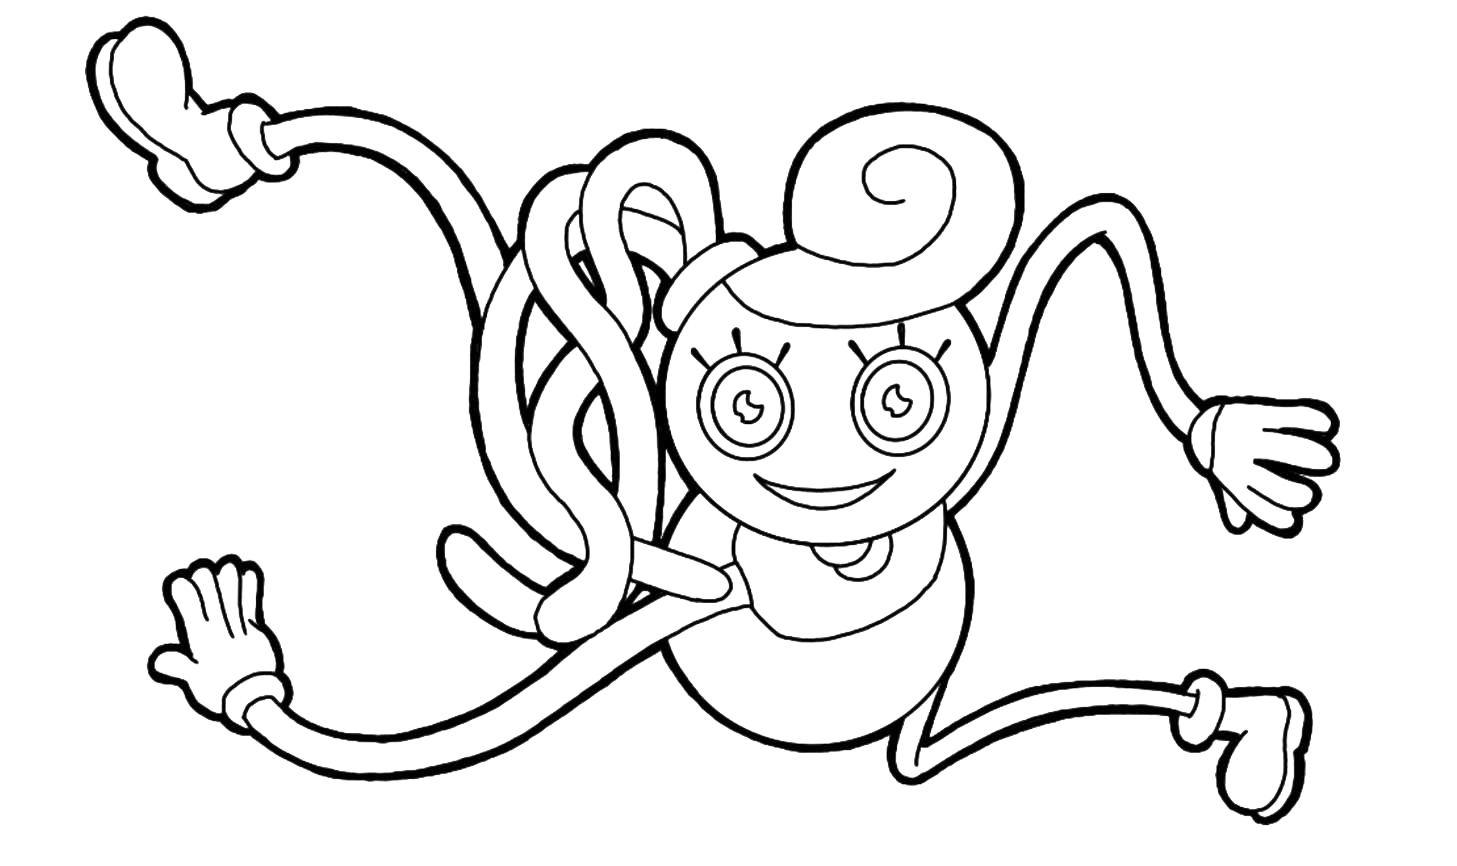 Mommy Long Legs Coloring Page 공략과 소식